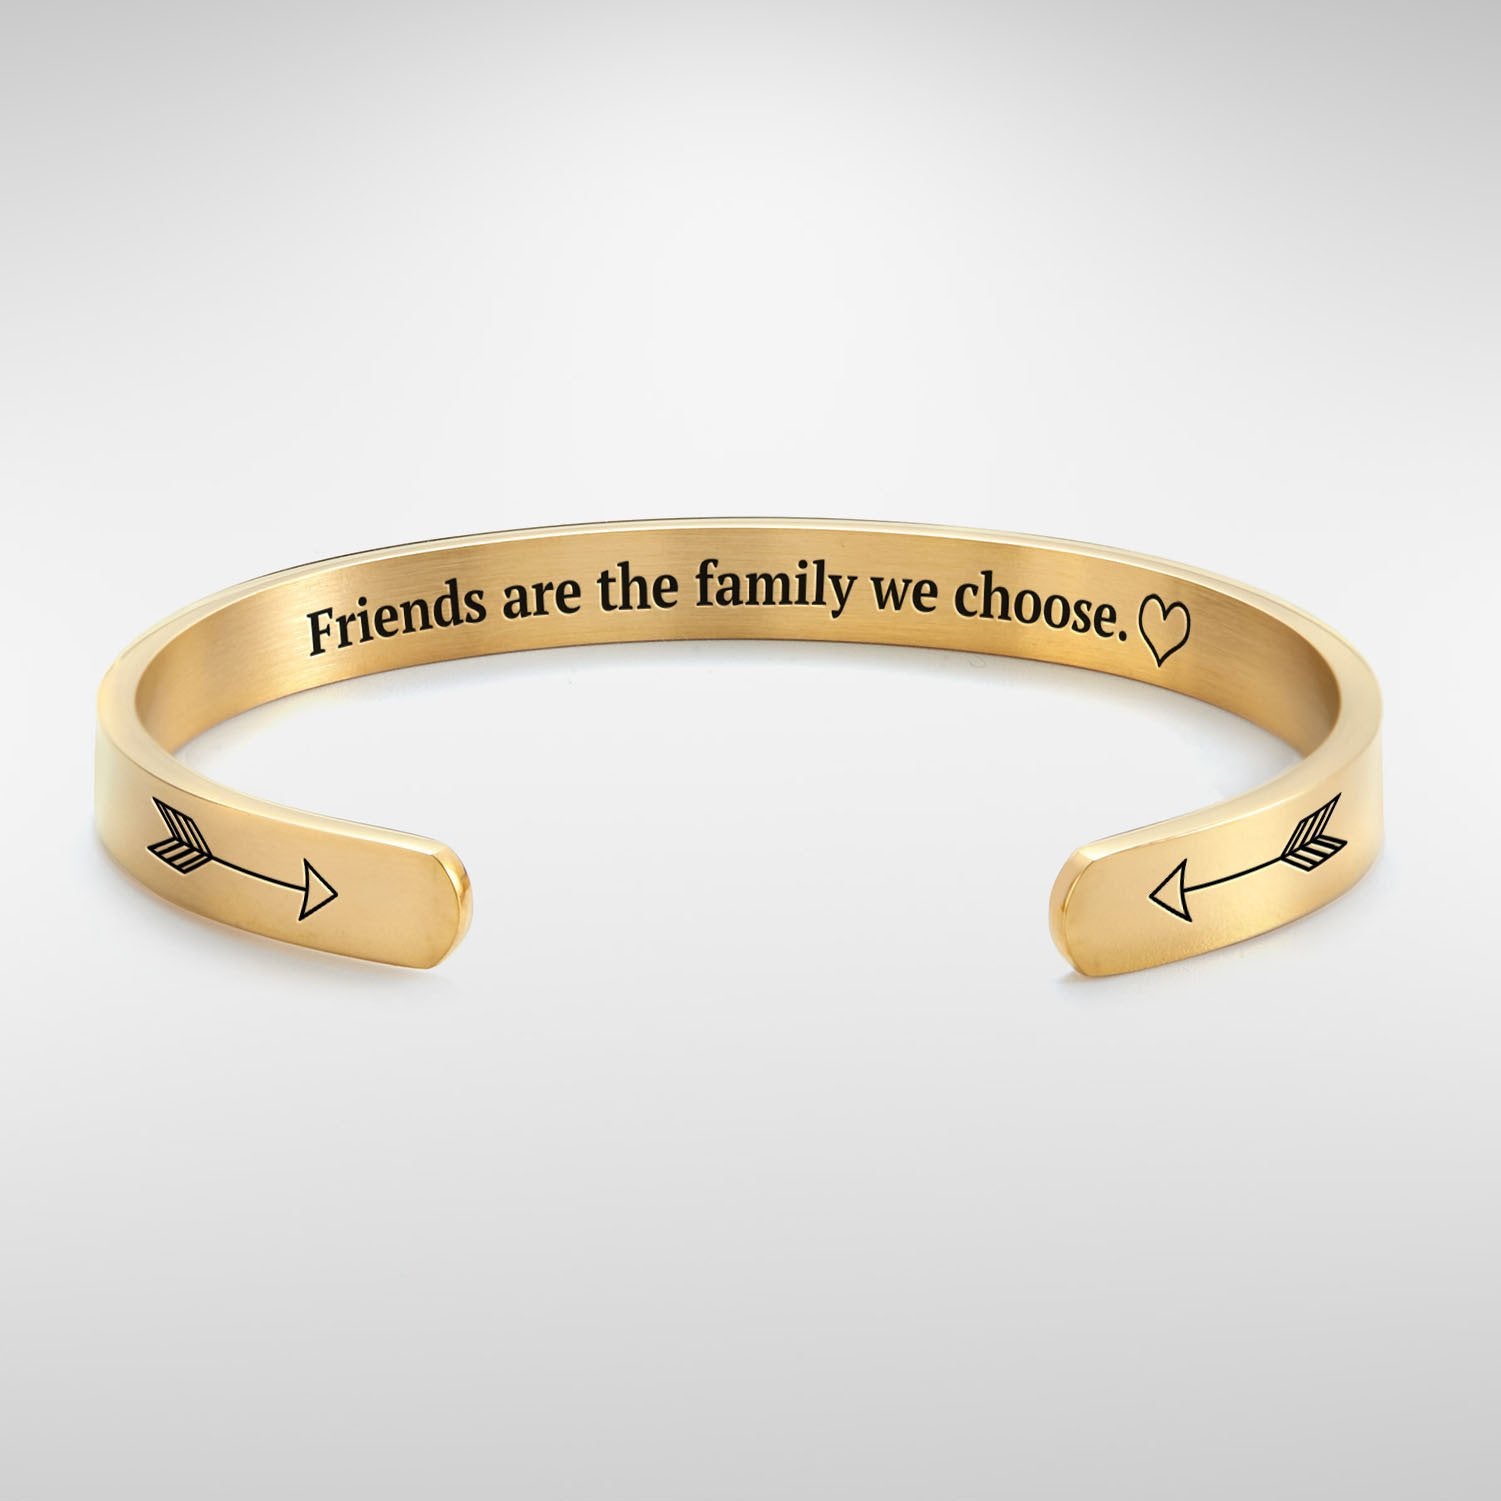 Friends are the Family We Choose Cuff Bracelet bracelet with gold plating